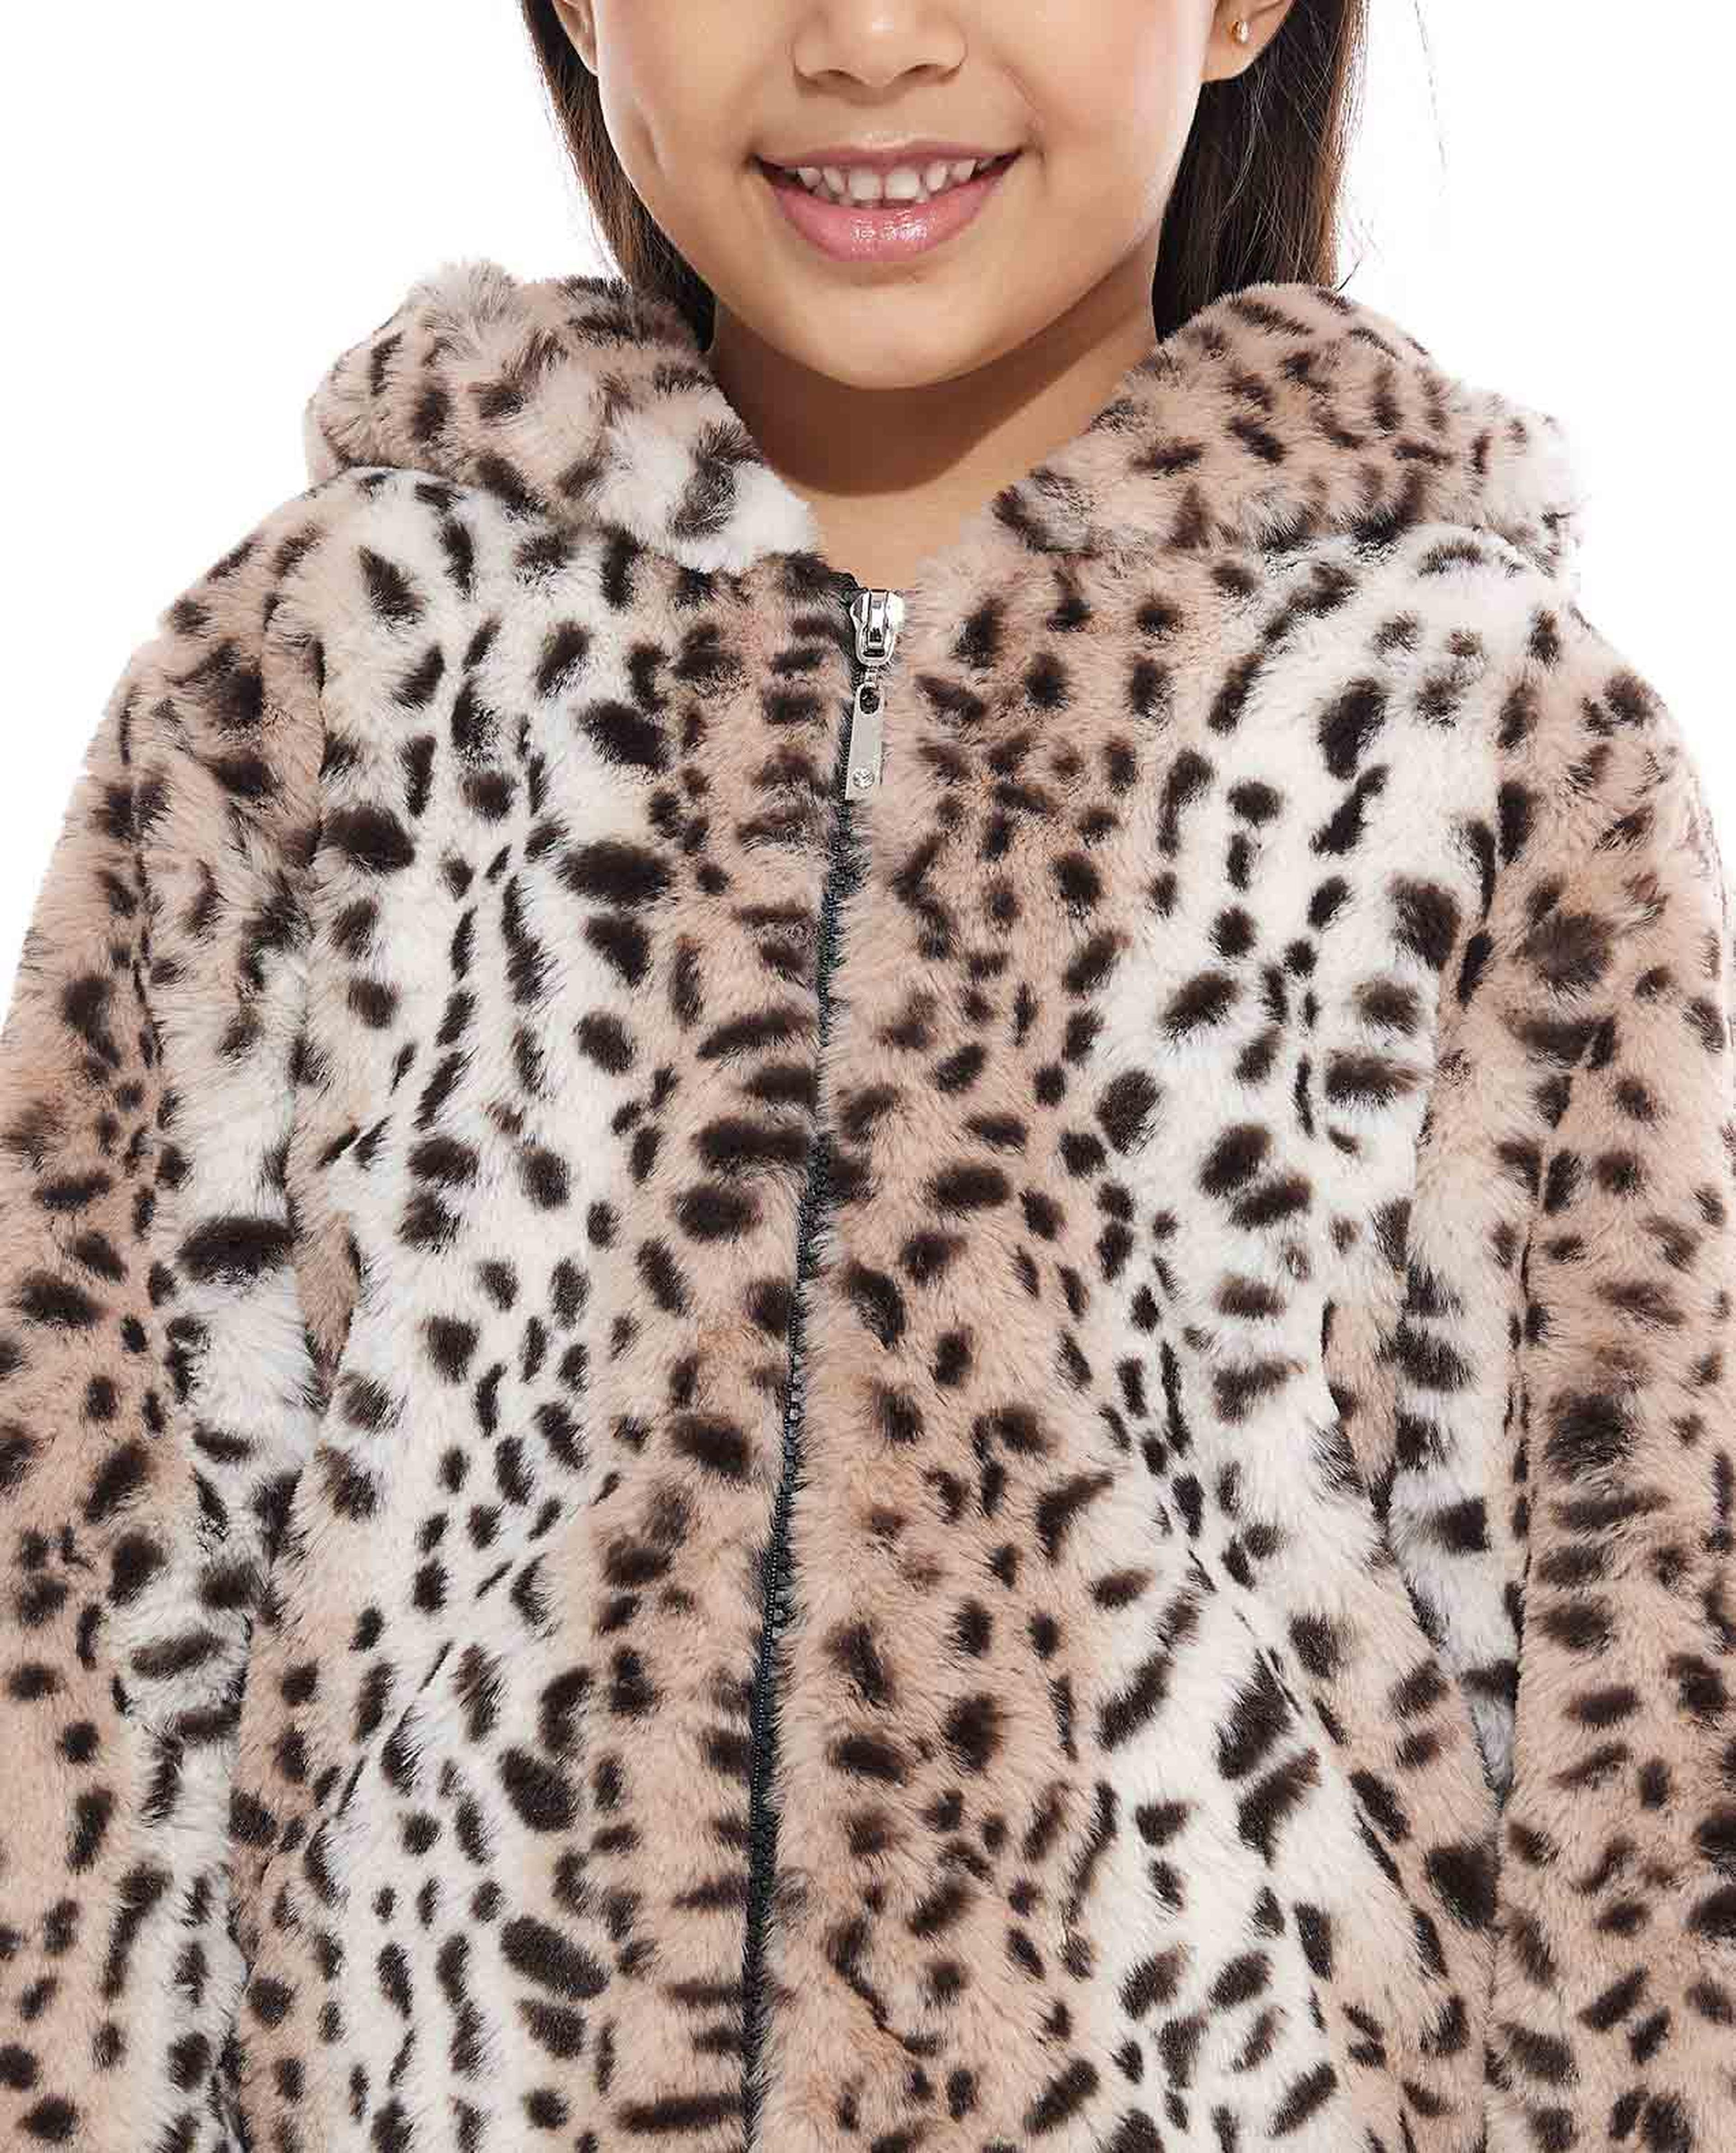 Animal Patterned Hooded Jacket with Zipper Closure